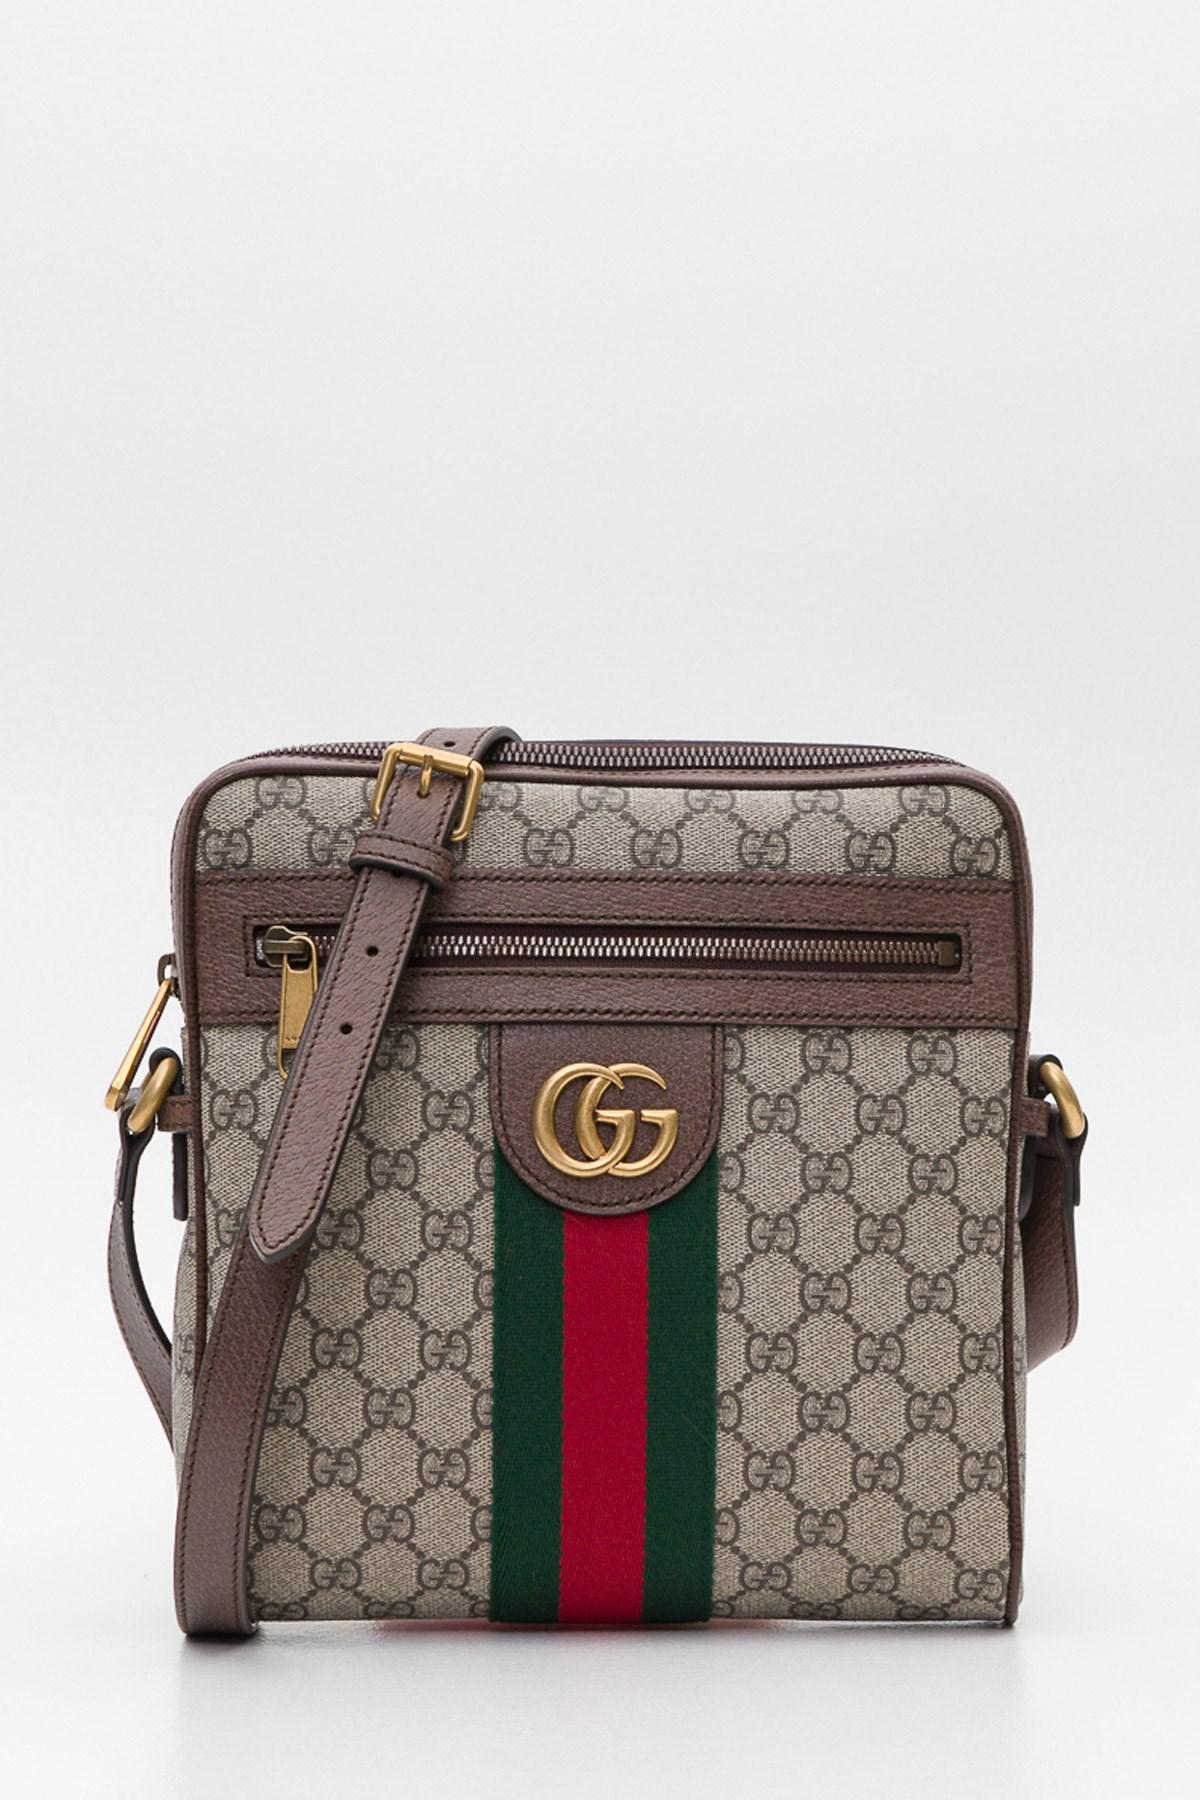 Lyst - Gucci Ophidia Gg Small Messenger Bag for Men